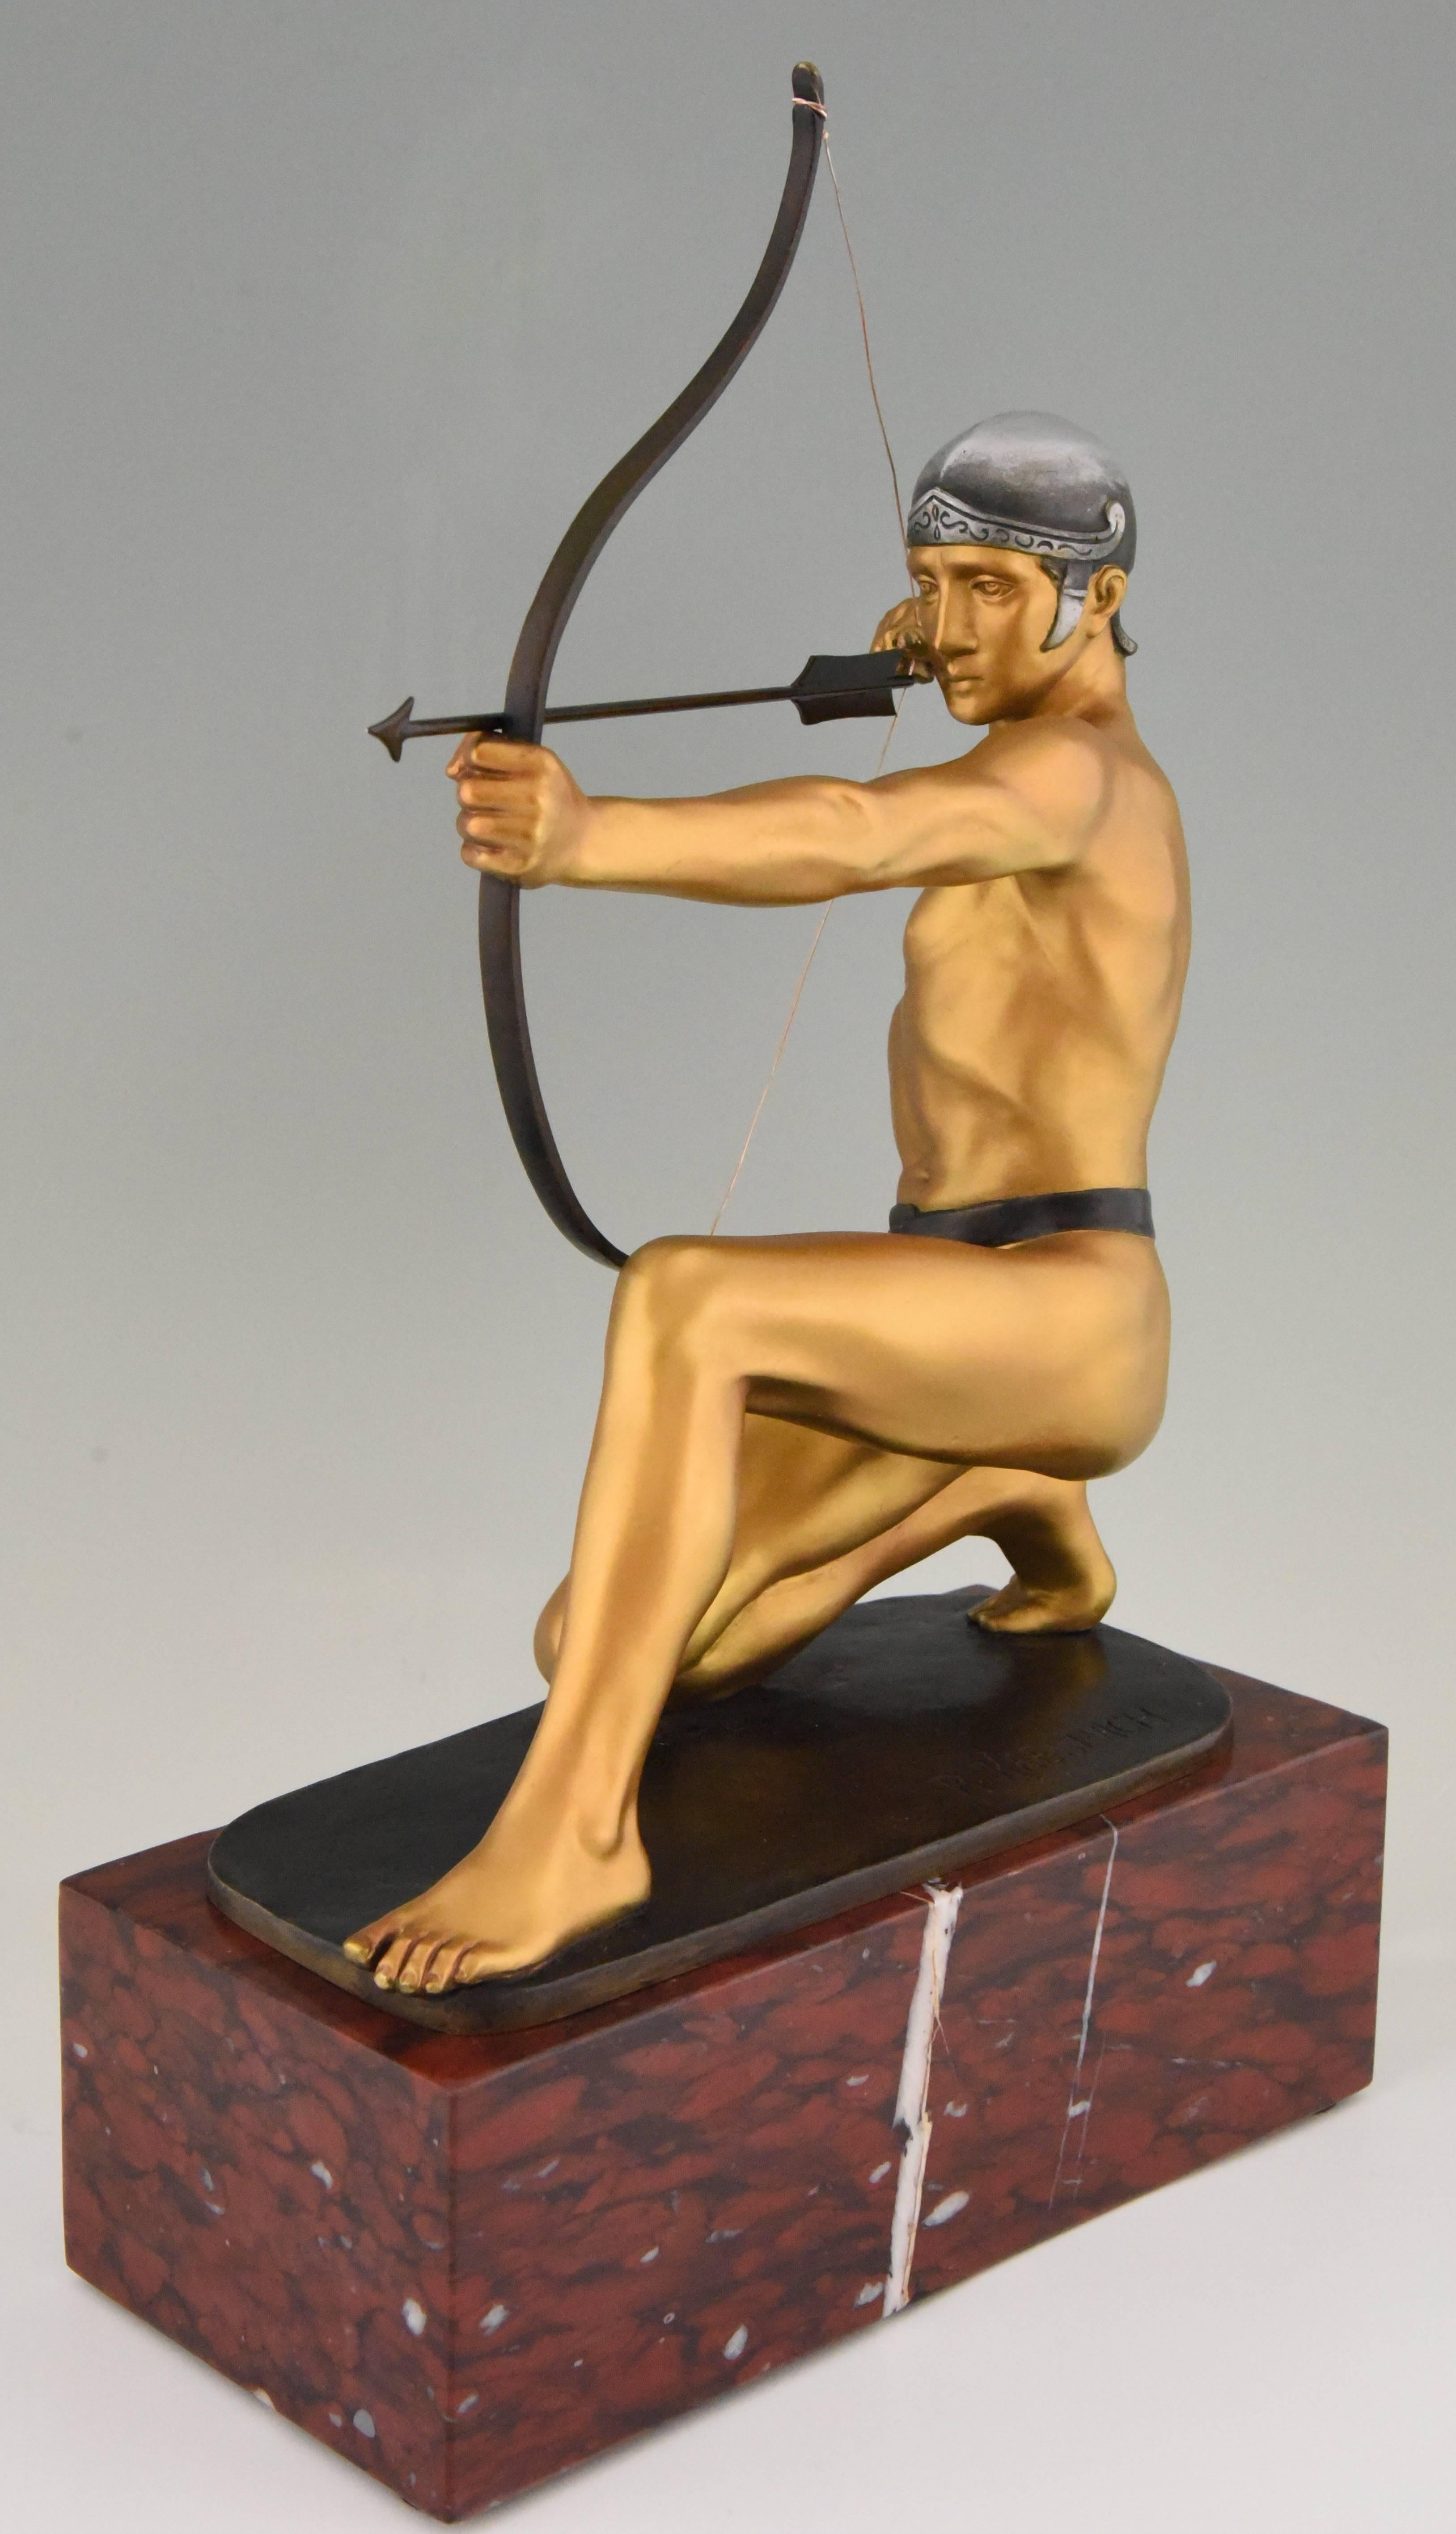 Patinated Antique Bronze Sculpture of a Male Nude Archer by Rudolf Kaesbach  1900